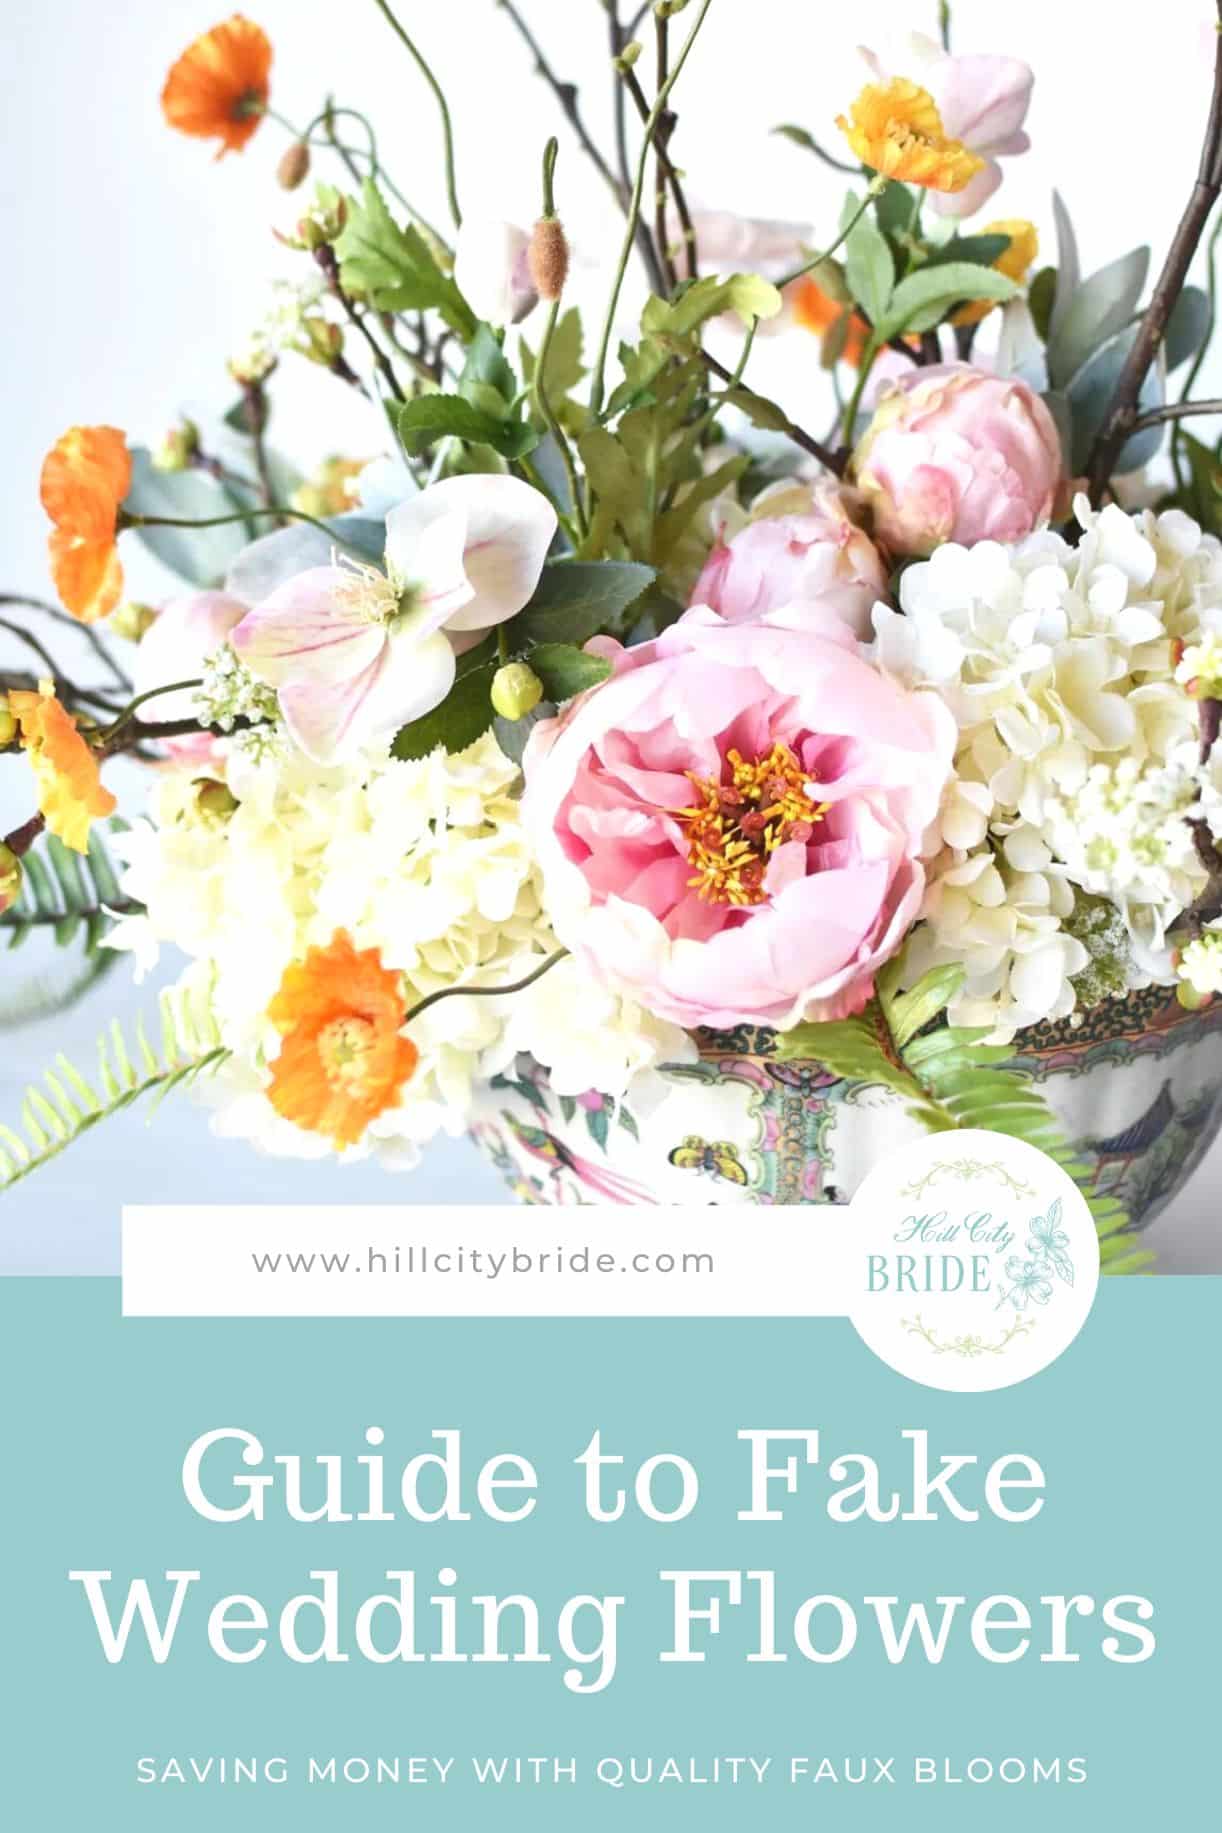 Guide to Faux Wedding Flowers